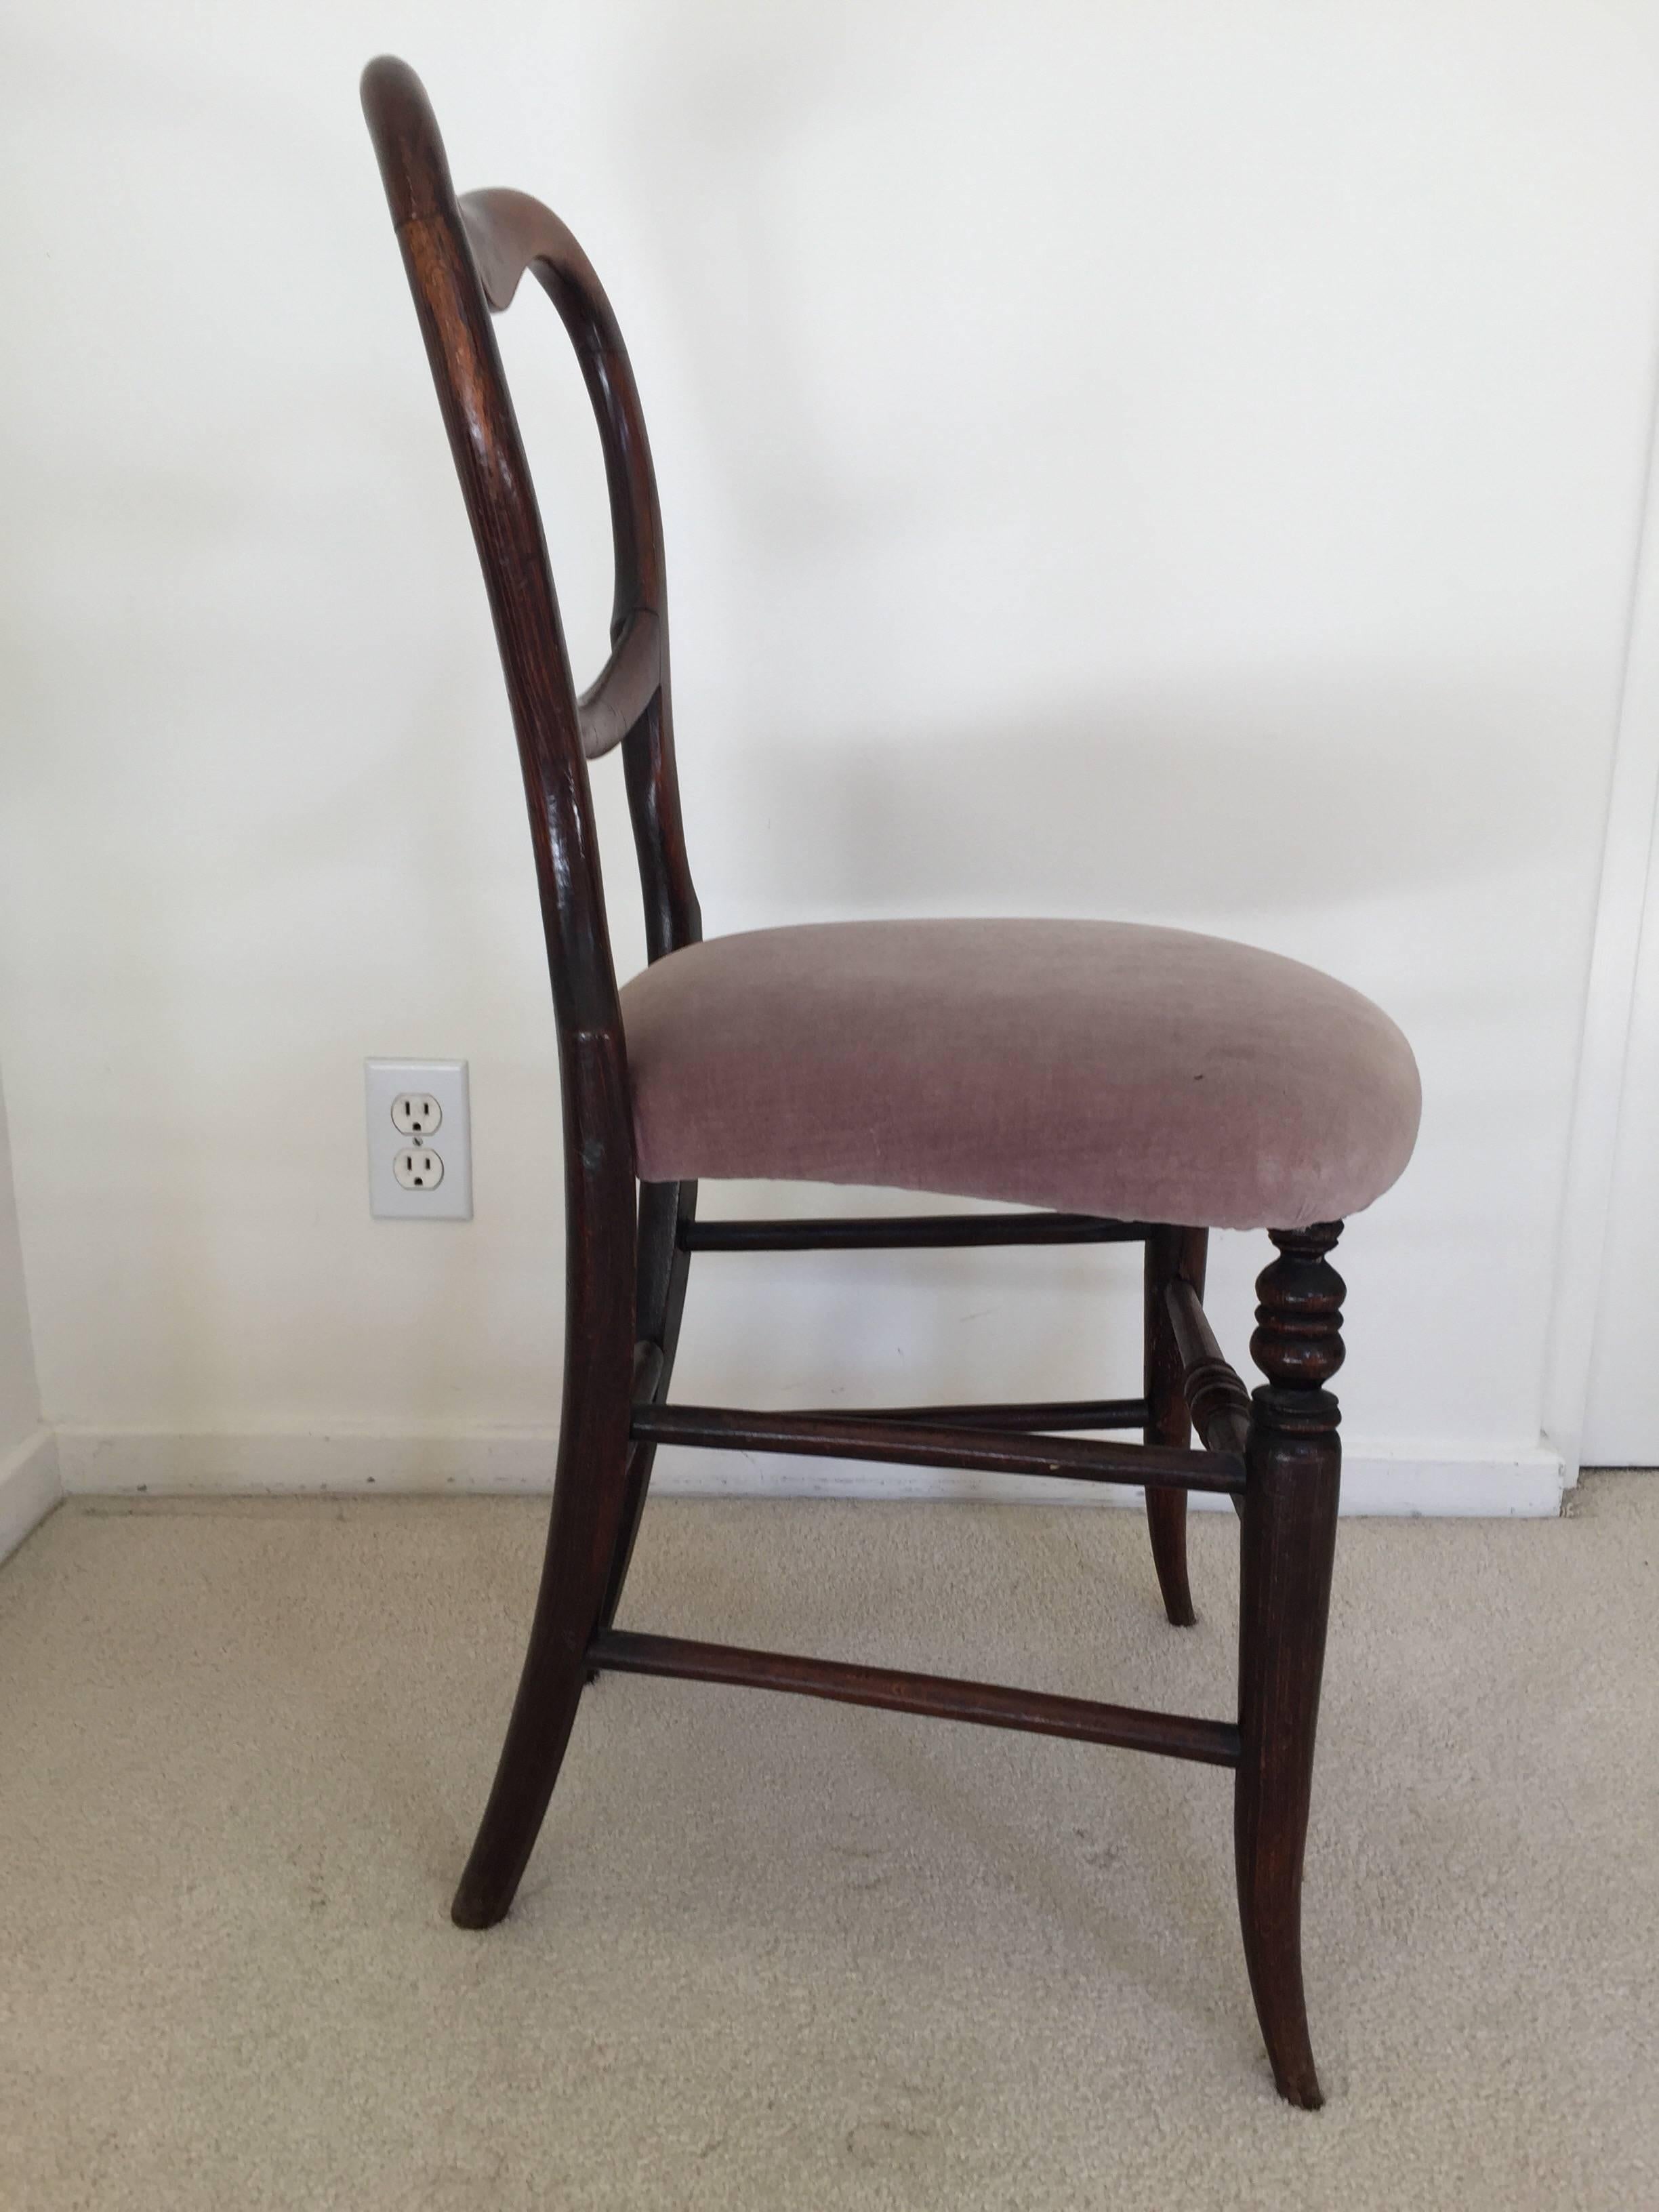 Hand-Crafted Pair of 19th Century Victorian Walnut Chairs